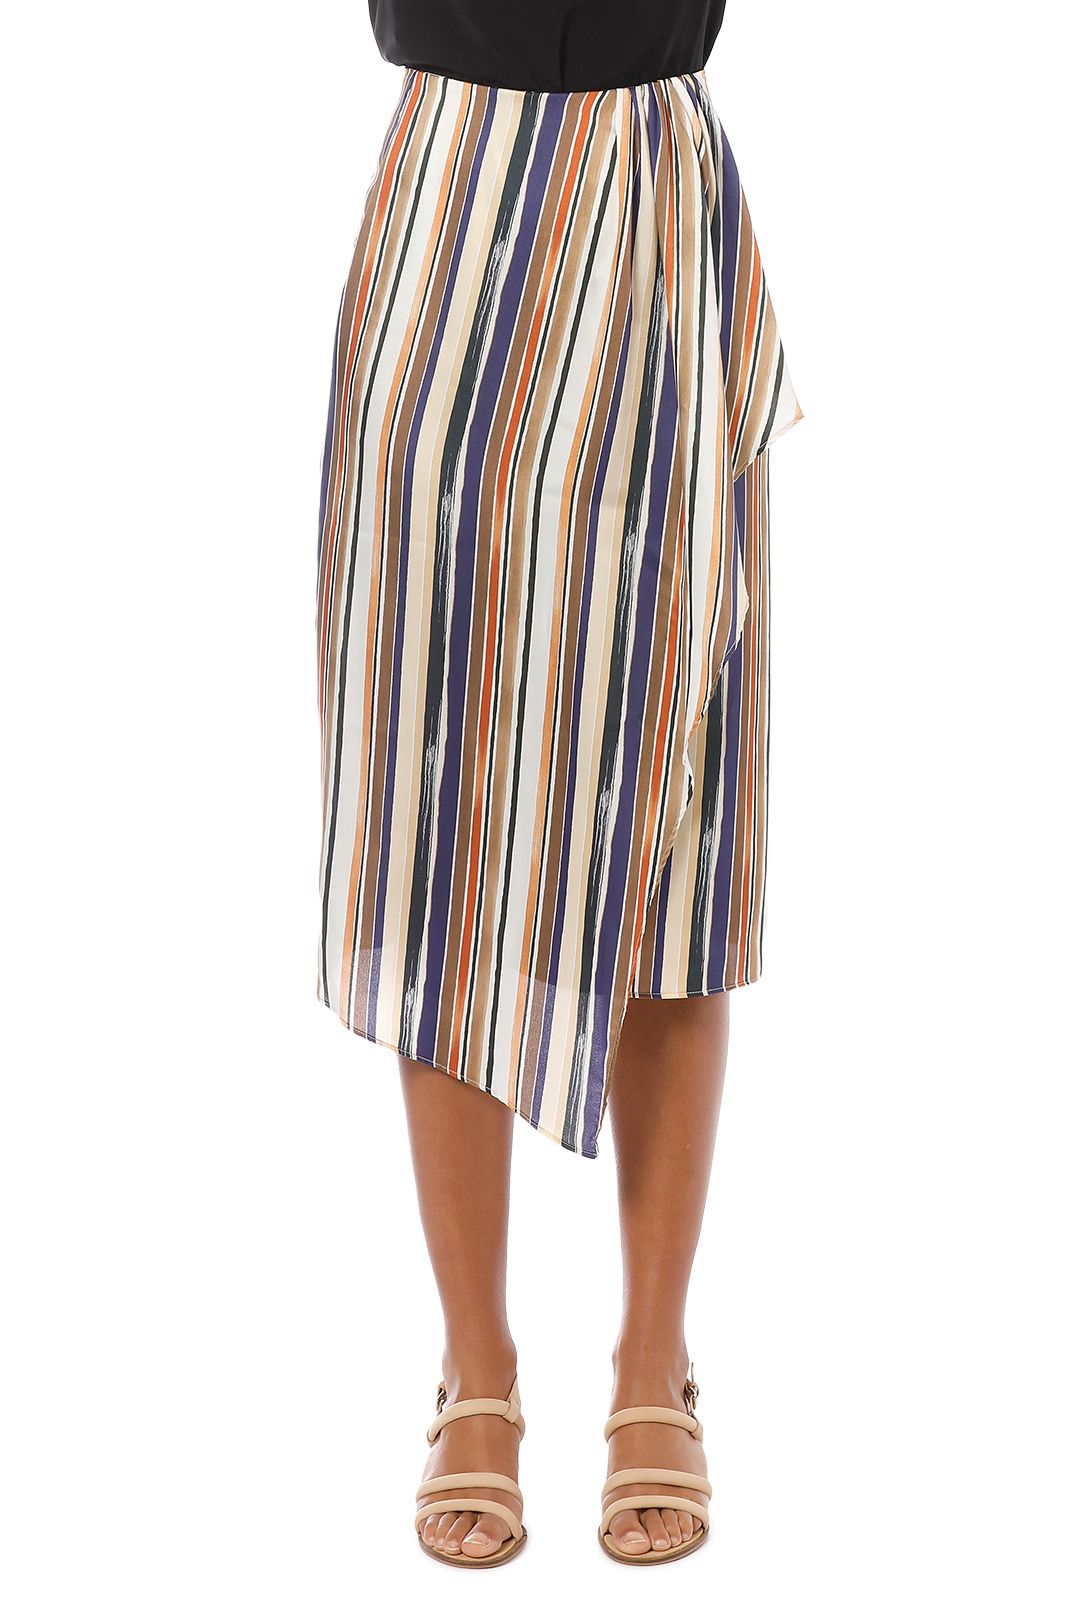 MNG - Ruffled Striped Skirt - Blue - Front Crop